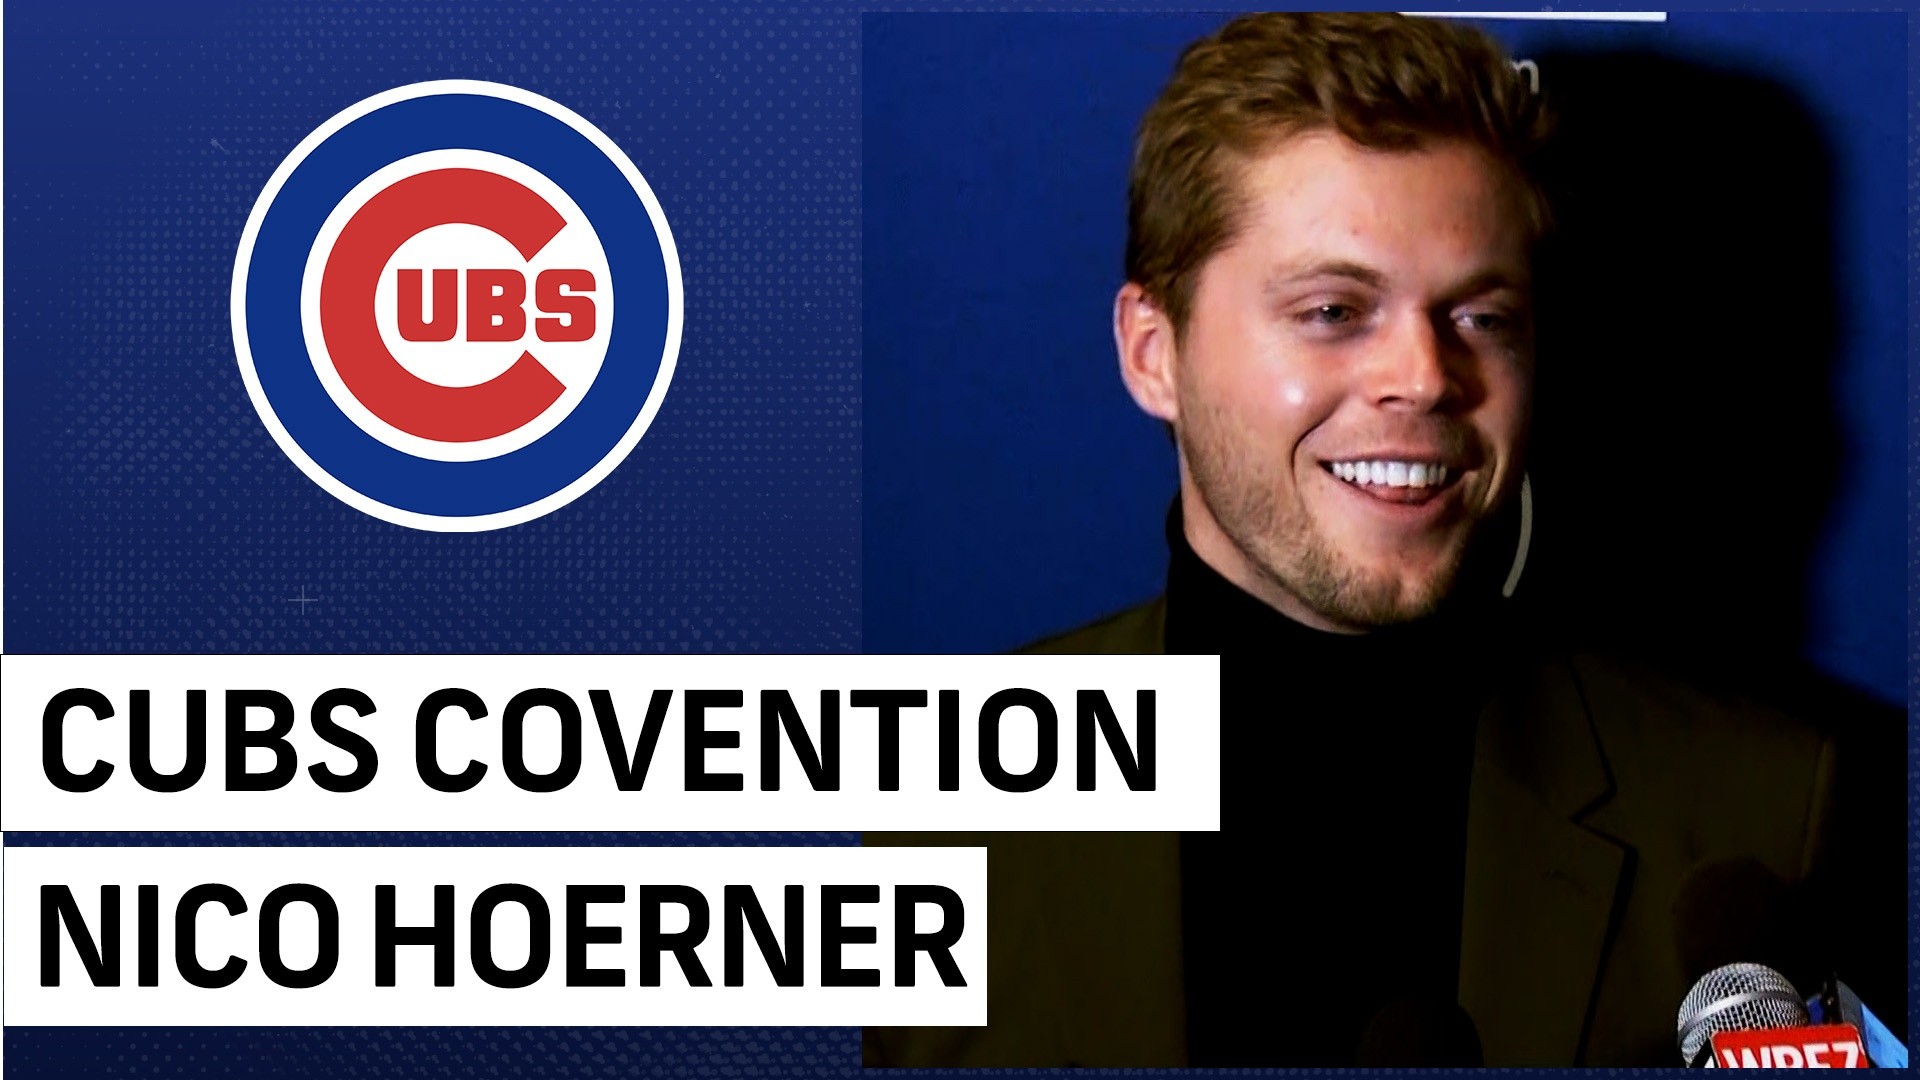 This is where I want to be': Cubs' Hoerner hopes signing extension